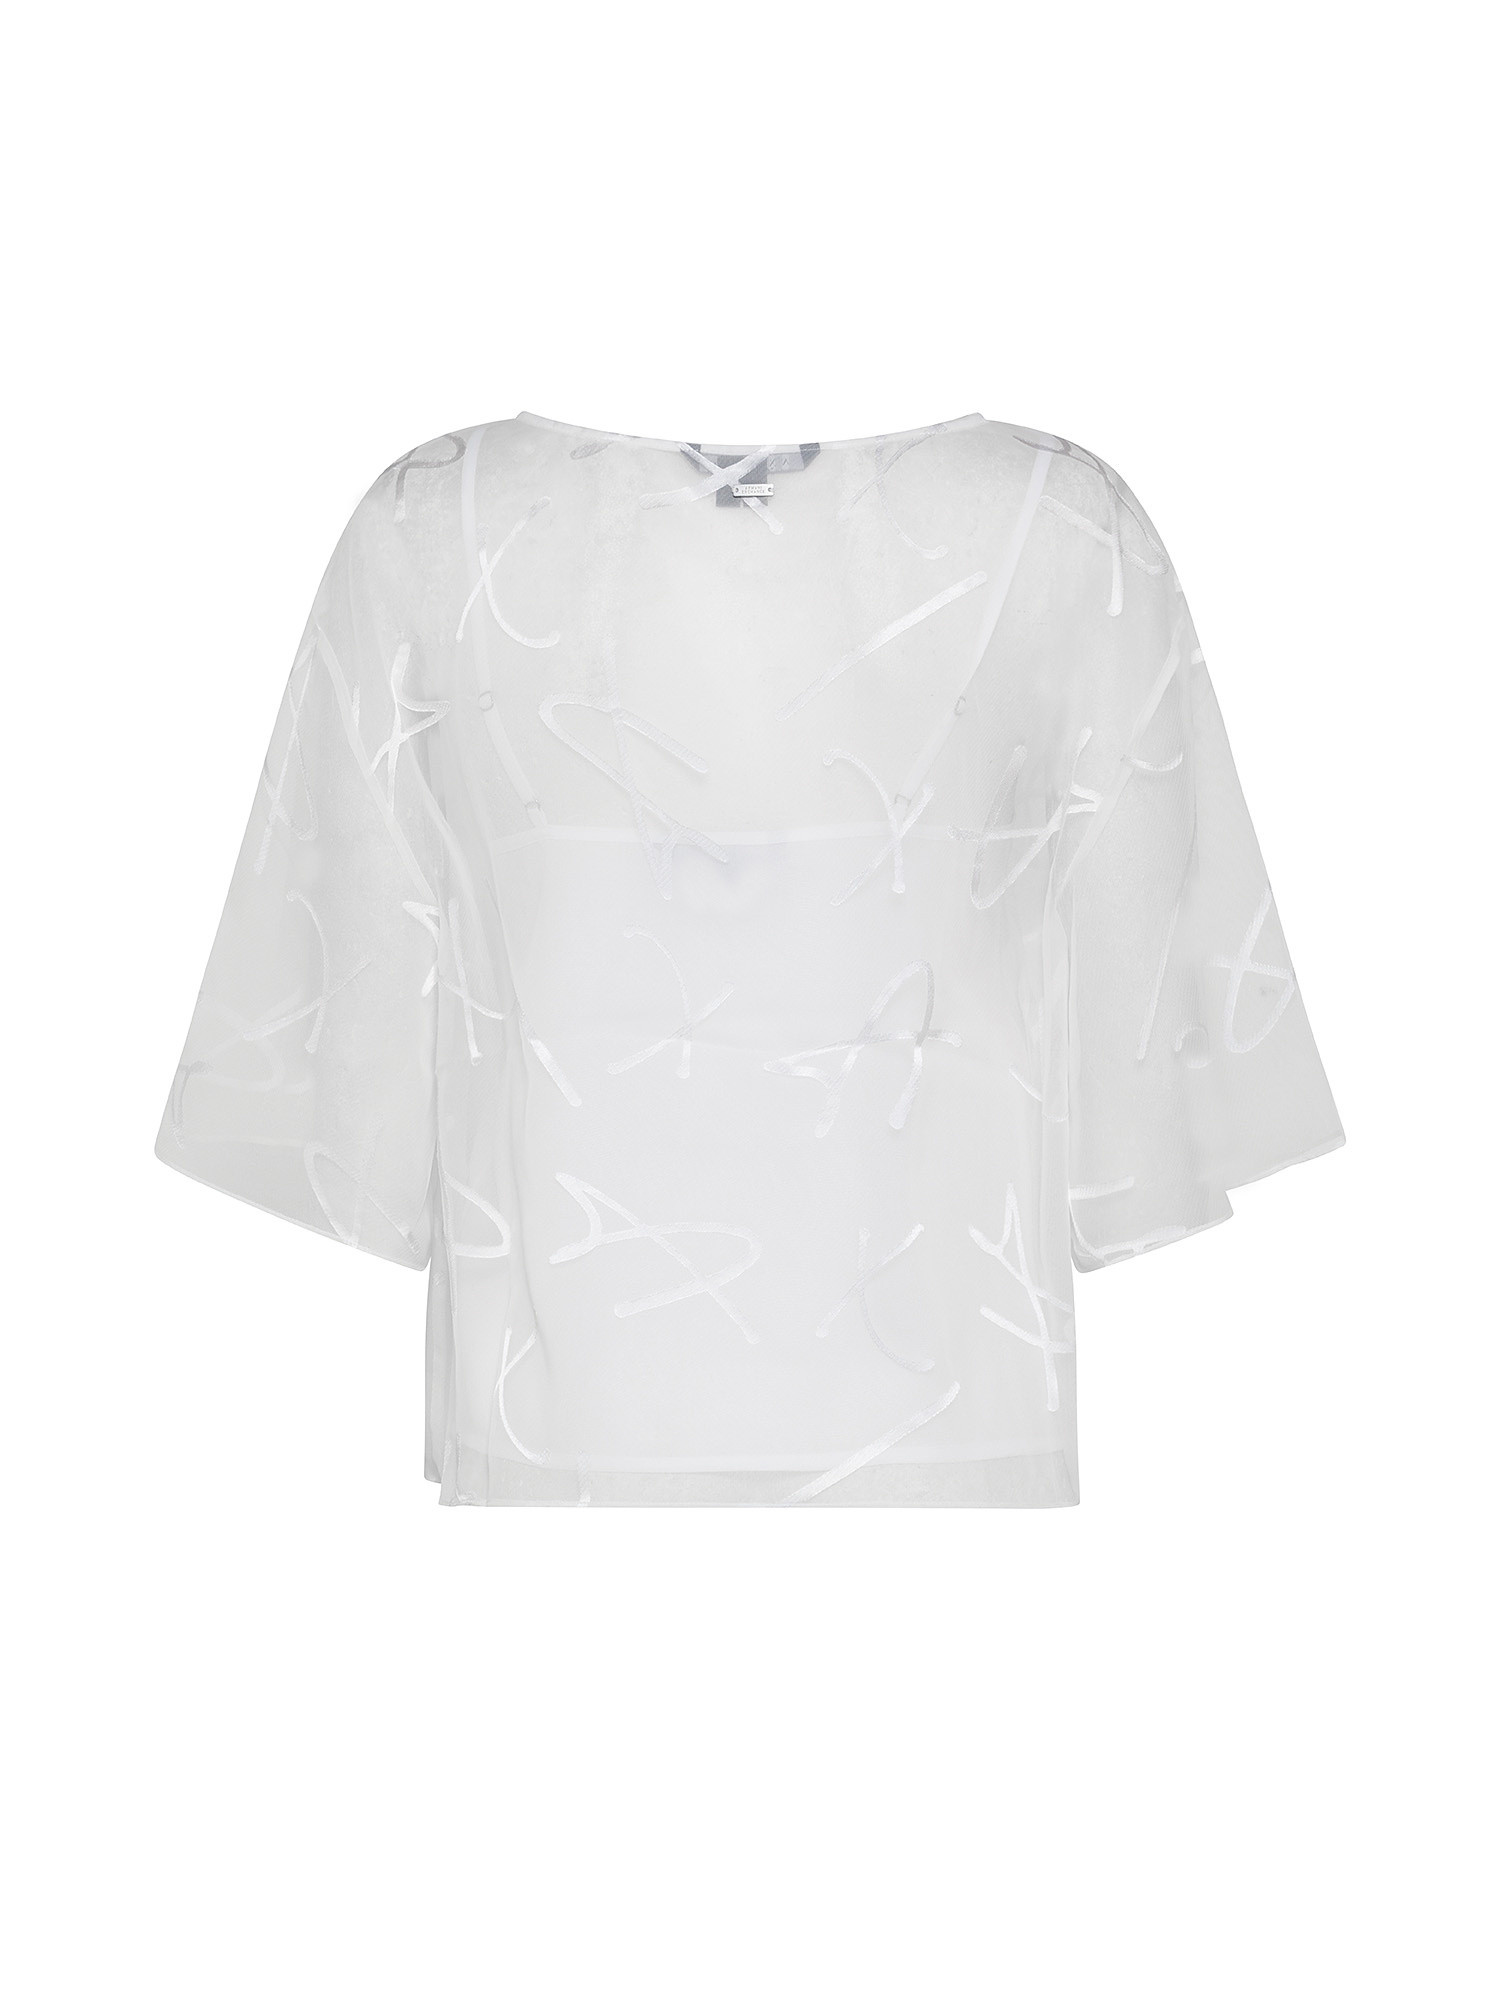 Armani Exchange - Blusa con scritta logo all over, Bianco, large image number 1